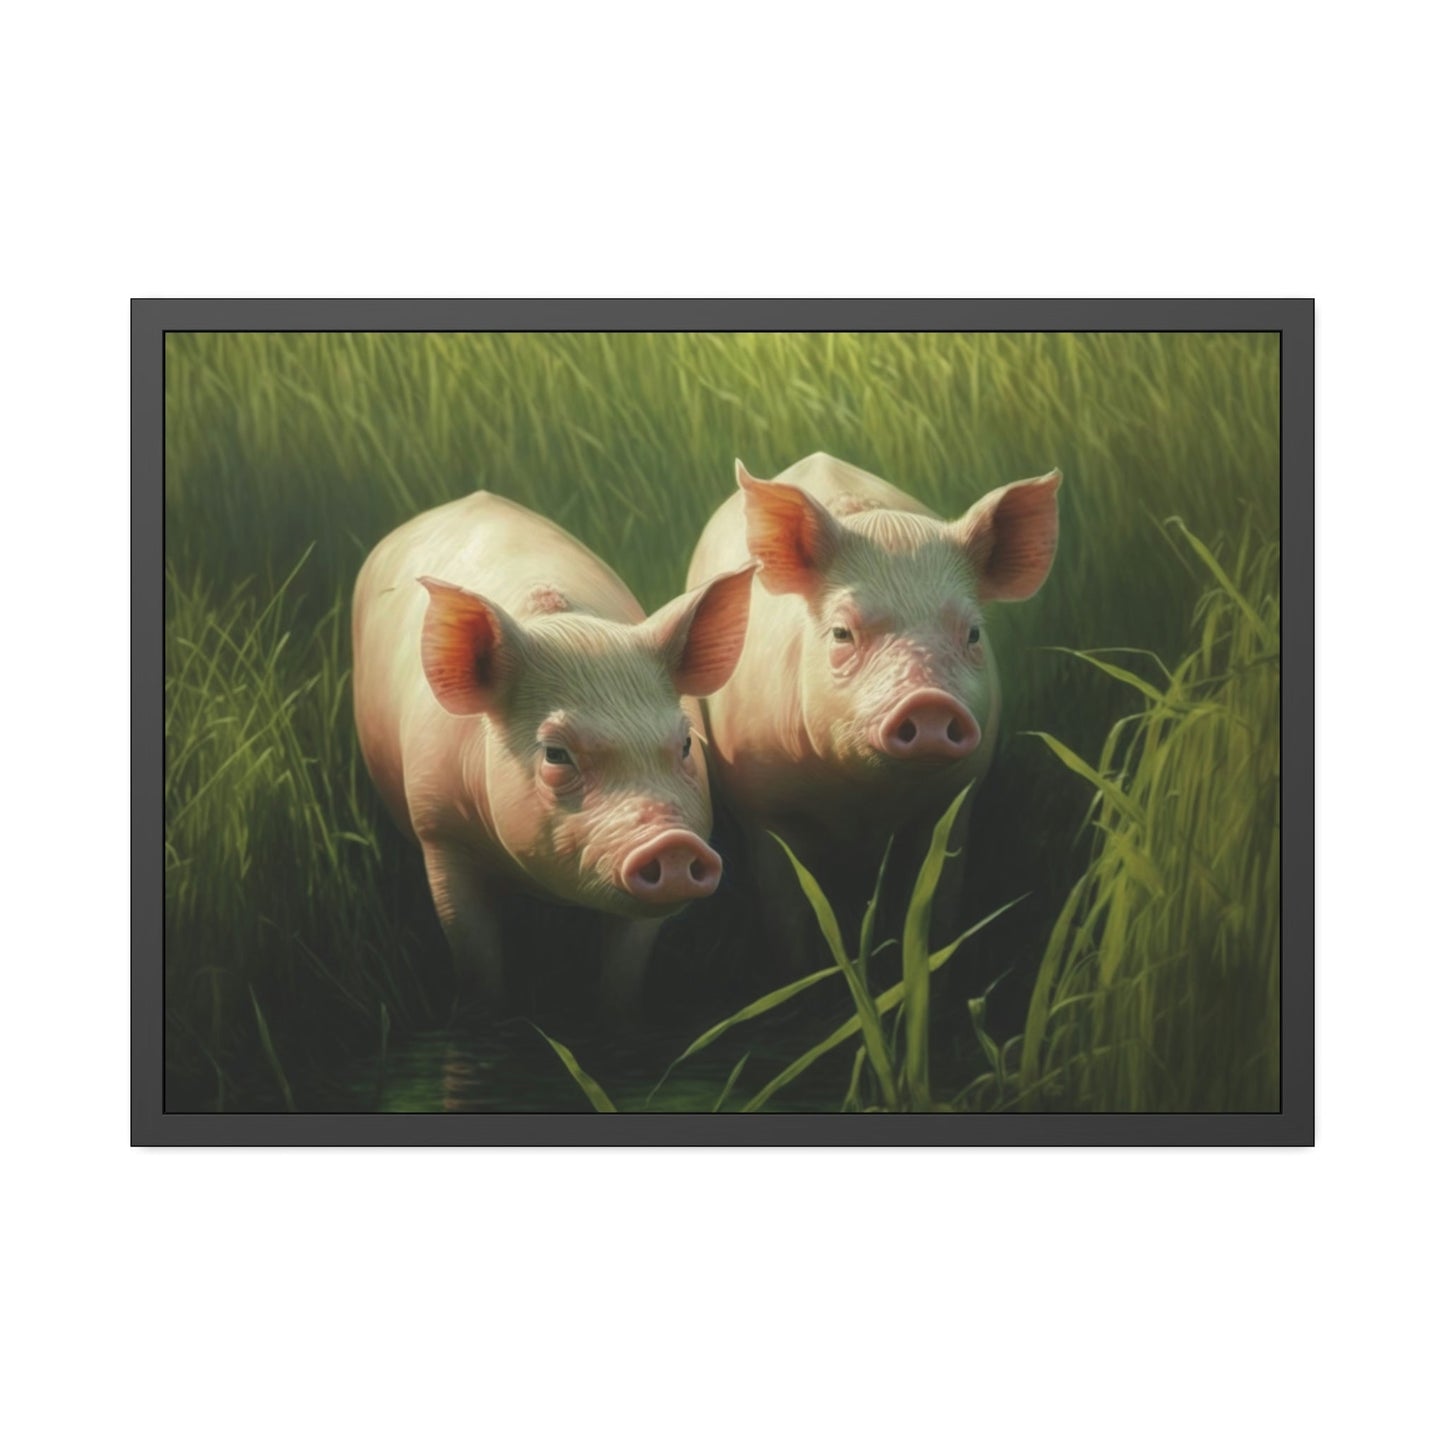 From Mud to Magic: A Joyful Gathering of Playful Pigs in the Meadow